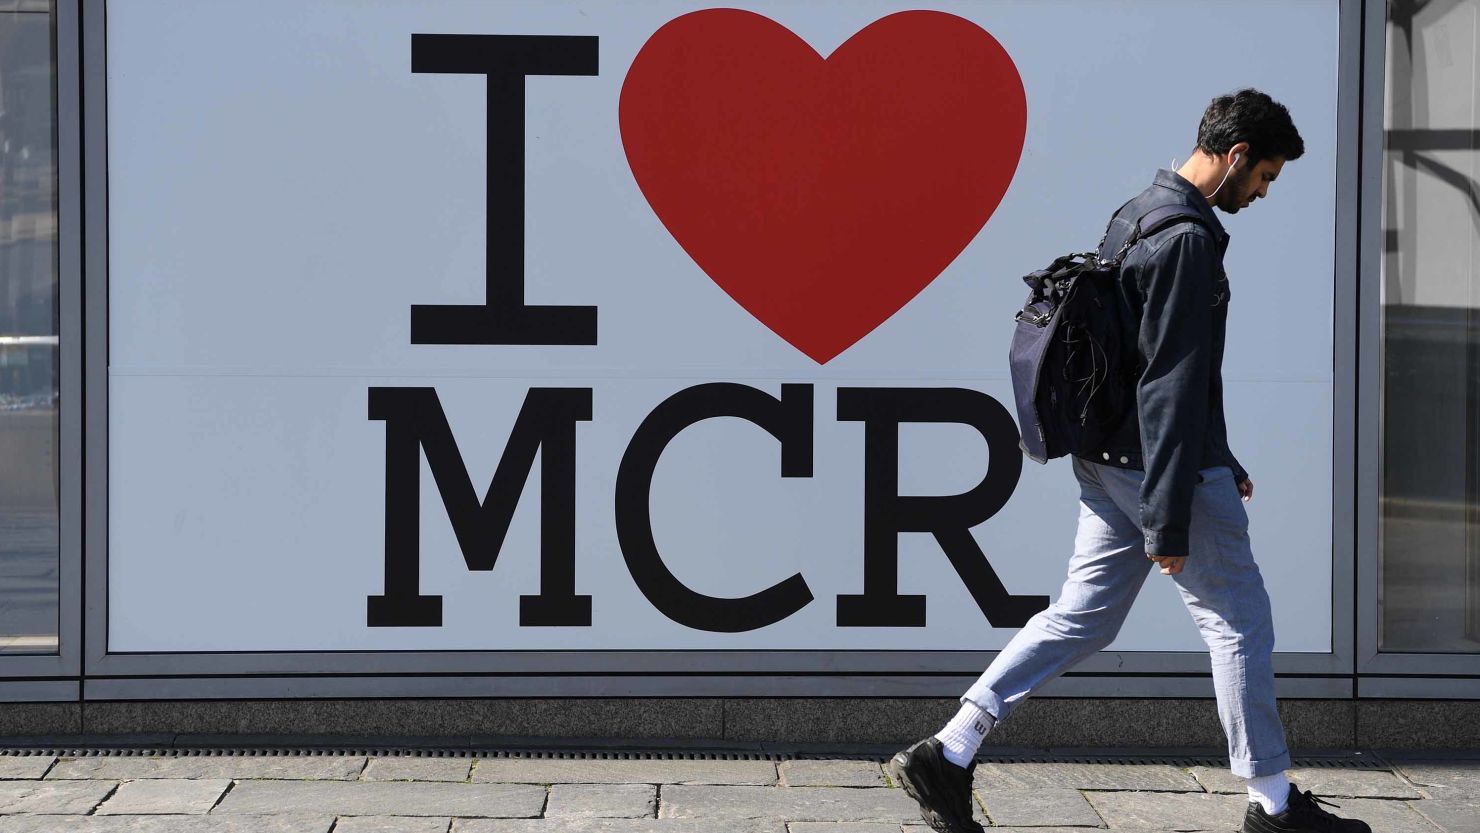 A pedestrian walks past a sign of support set up in the wake of the Manchester Arena bombing in central Manchester on May 22, 2018, the one year anniversary of the deadly attack.